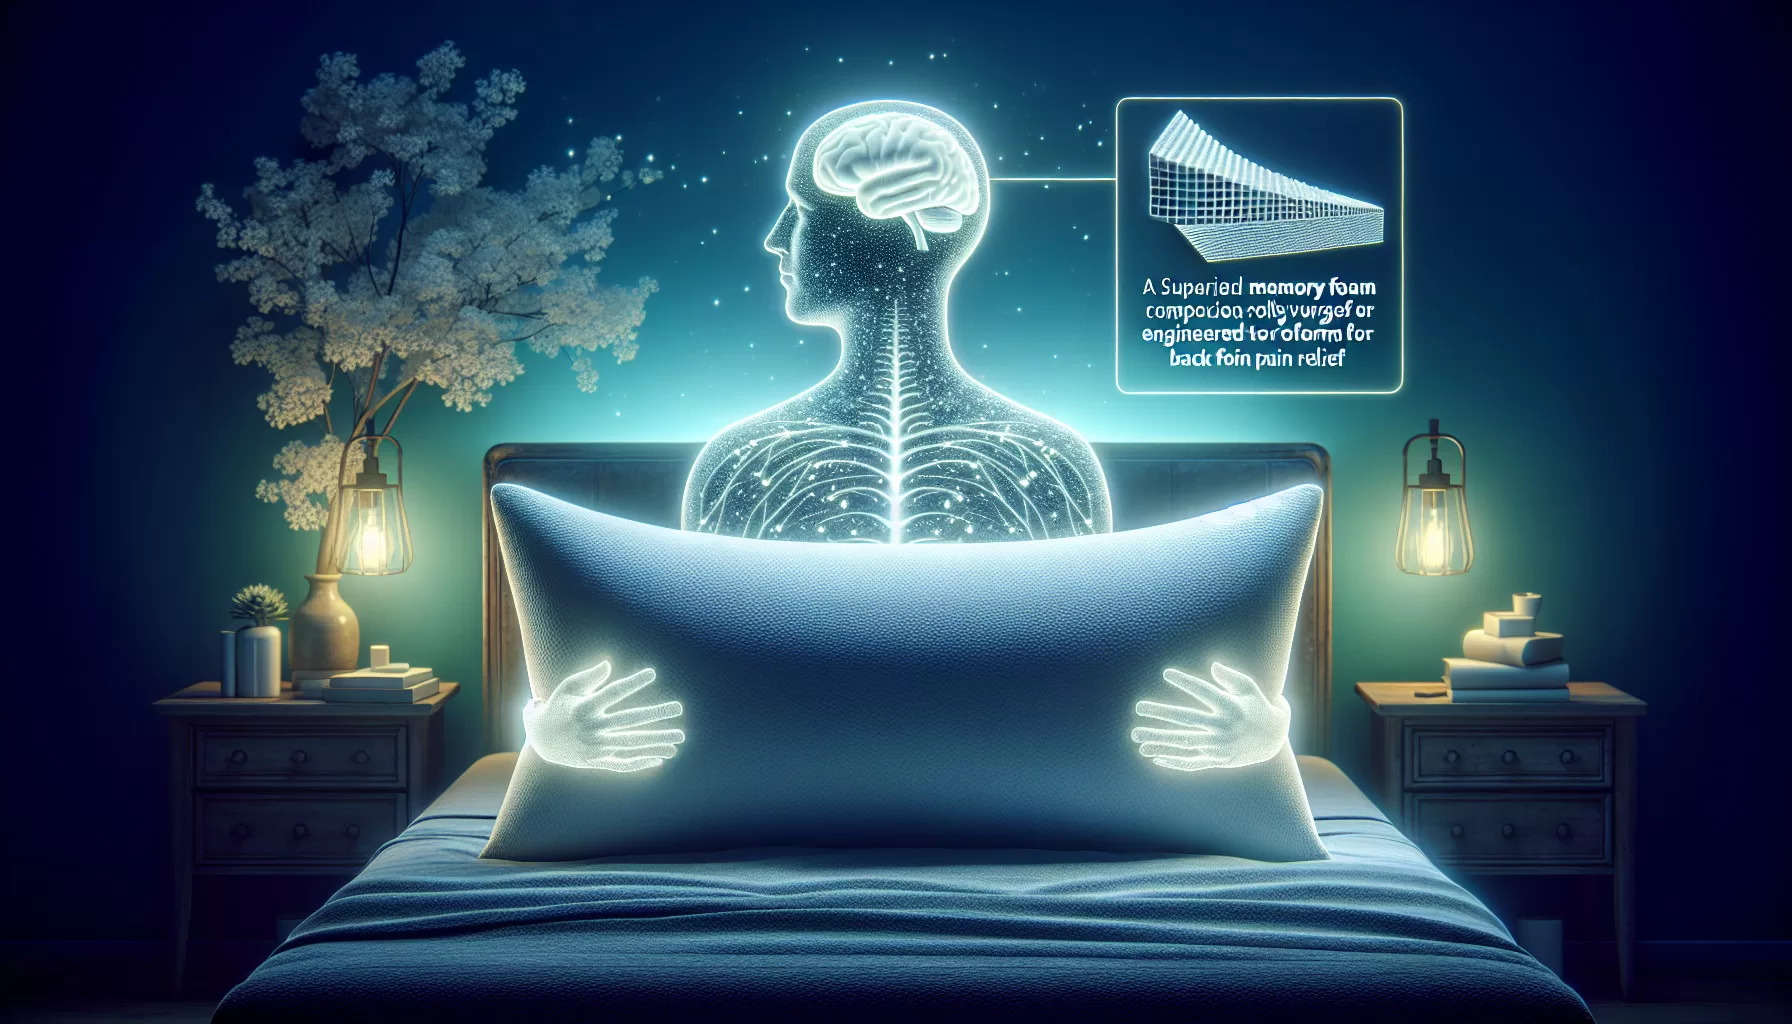 How To Choose The Right Memory Foam Pillow For Back Pain Relief